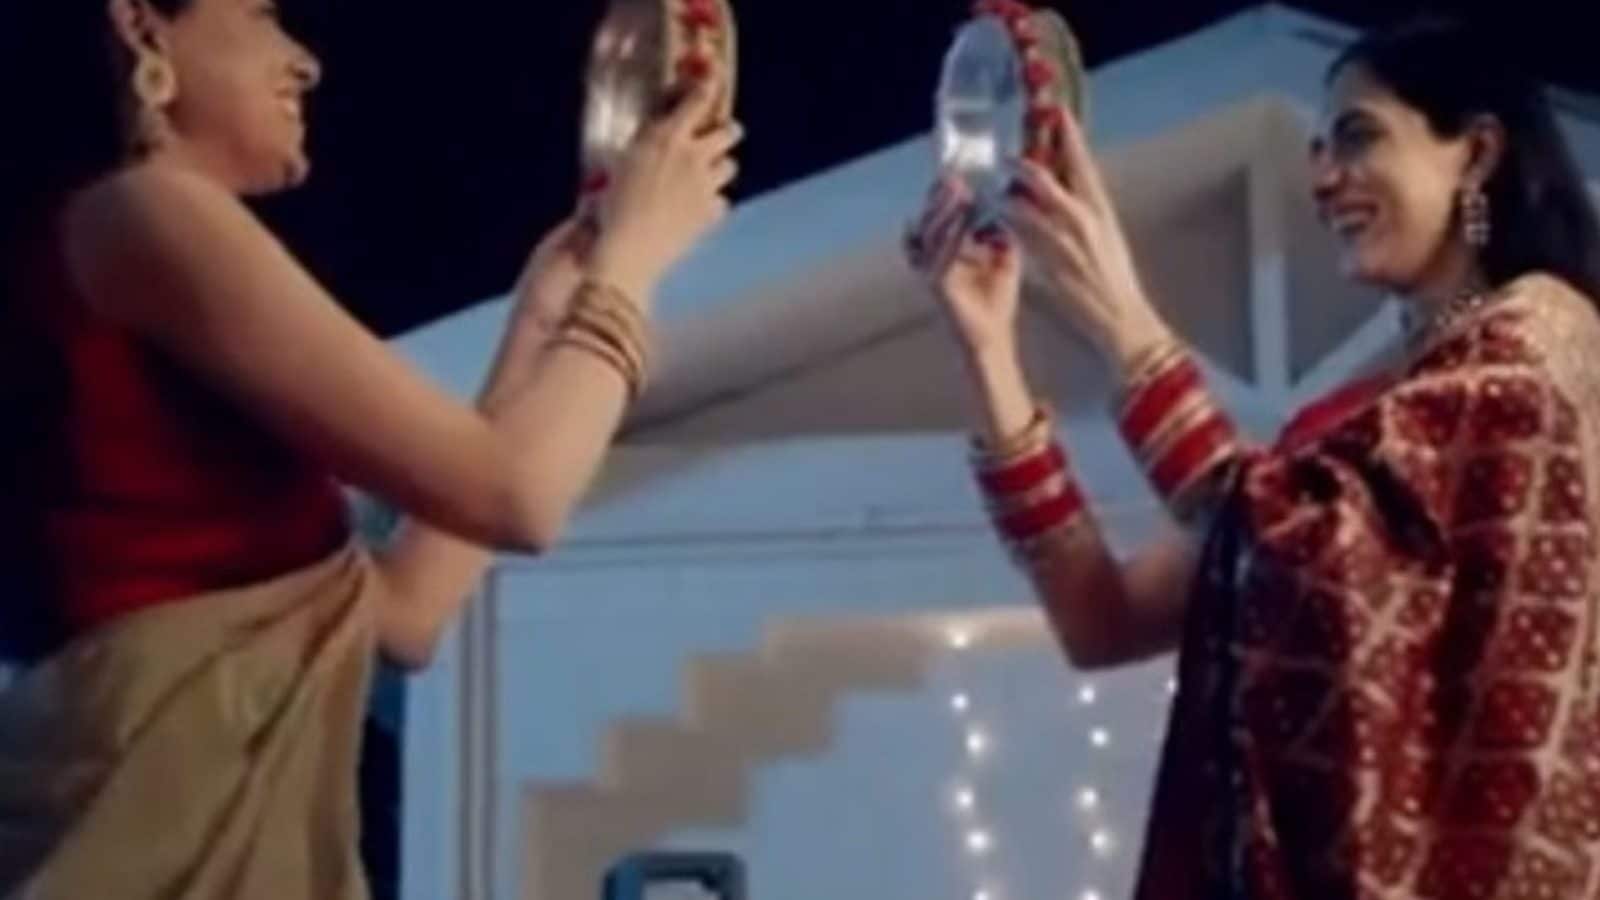 Daburs Karwa Chauth Ad With A Same Sex Couple Is Causing Uproar On Twitter Heres Why